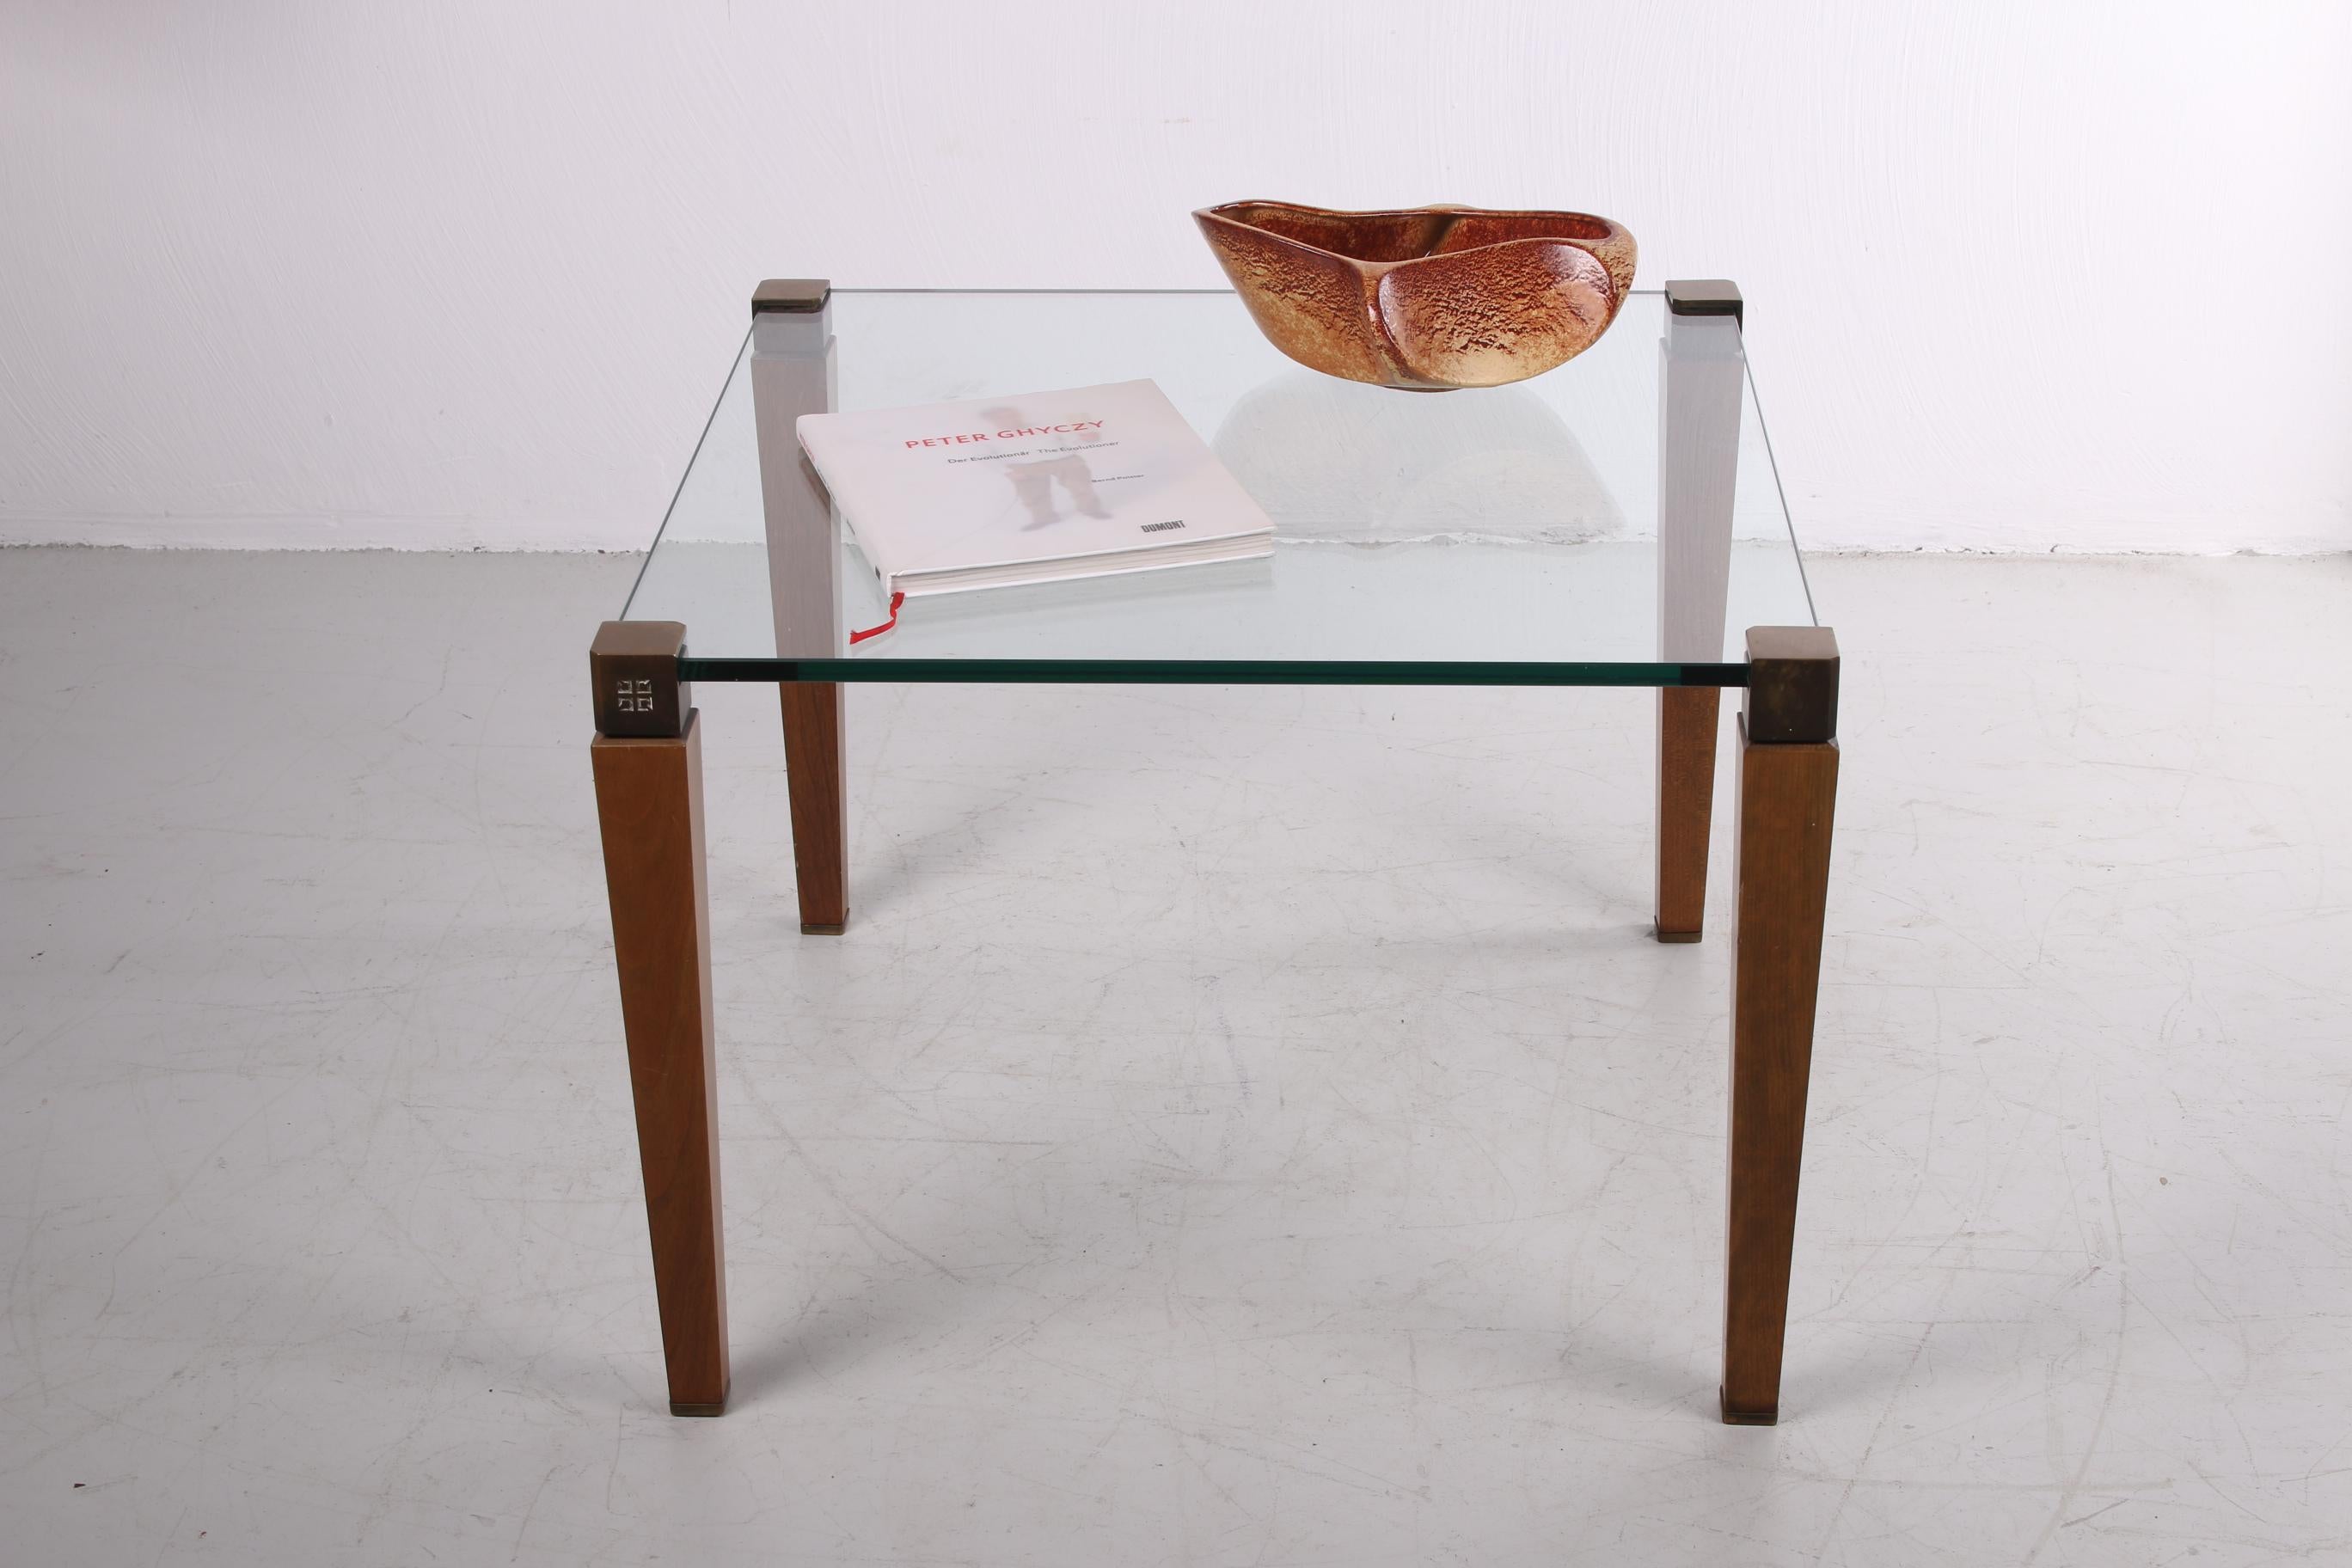 A beautiful coffee table by the Hungarian designer Peter Ghyzcy. This version was produced in the 1970s in the Netherlands.

This T56/2 coffee table has clear glass as table top and stands on wooden legs with a signed bronze head.

This table, like